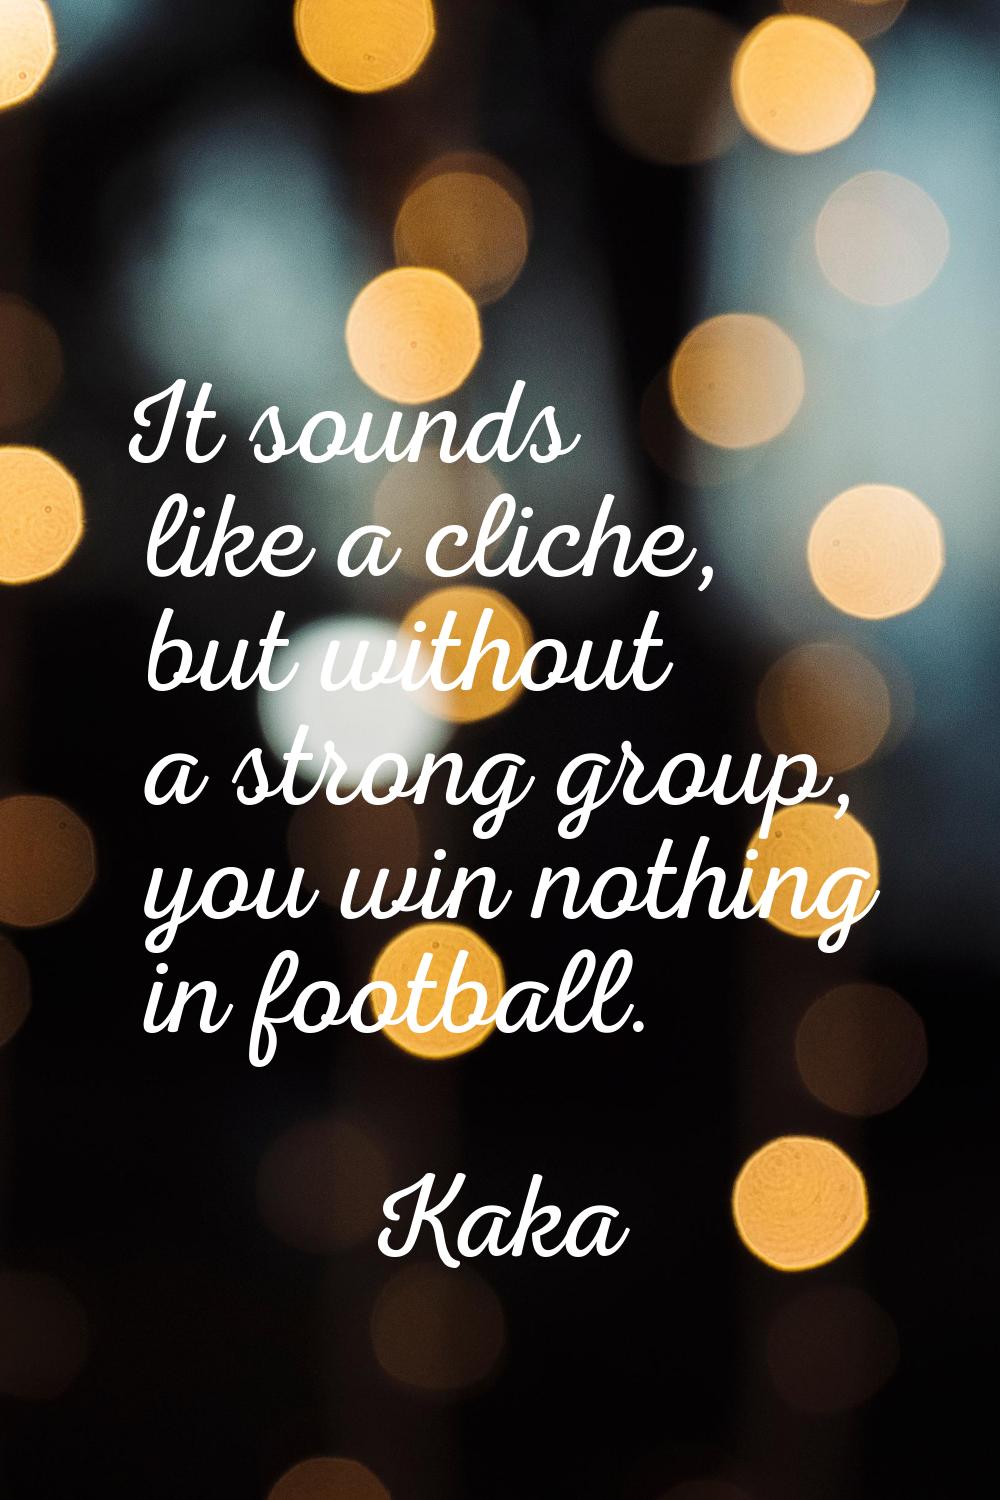 It sounds like a cliche, but without a strong group, you win nothing in football.